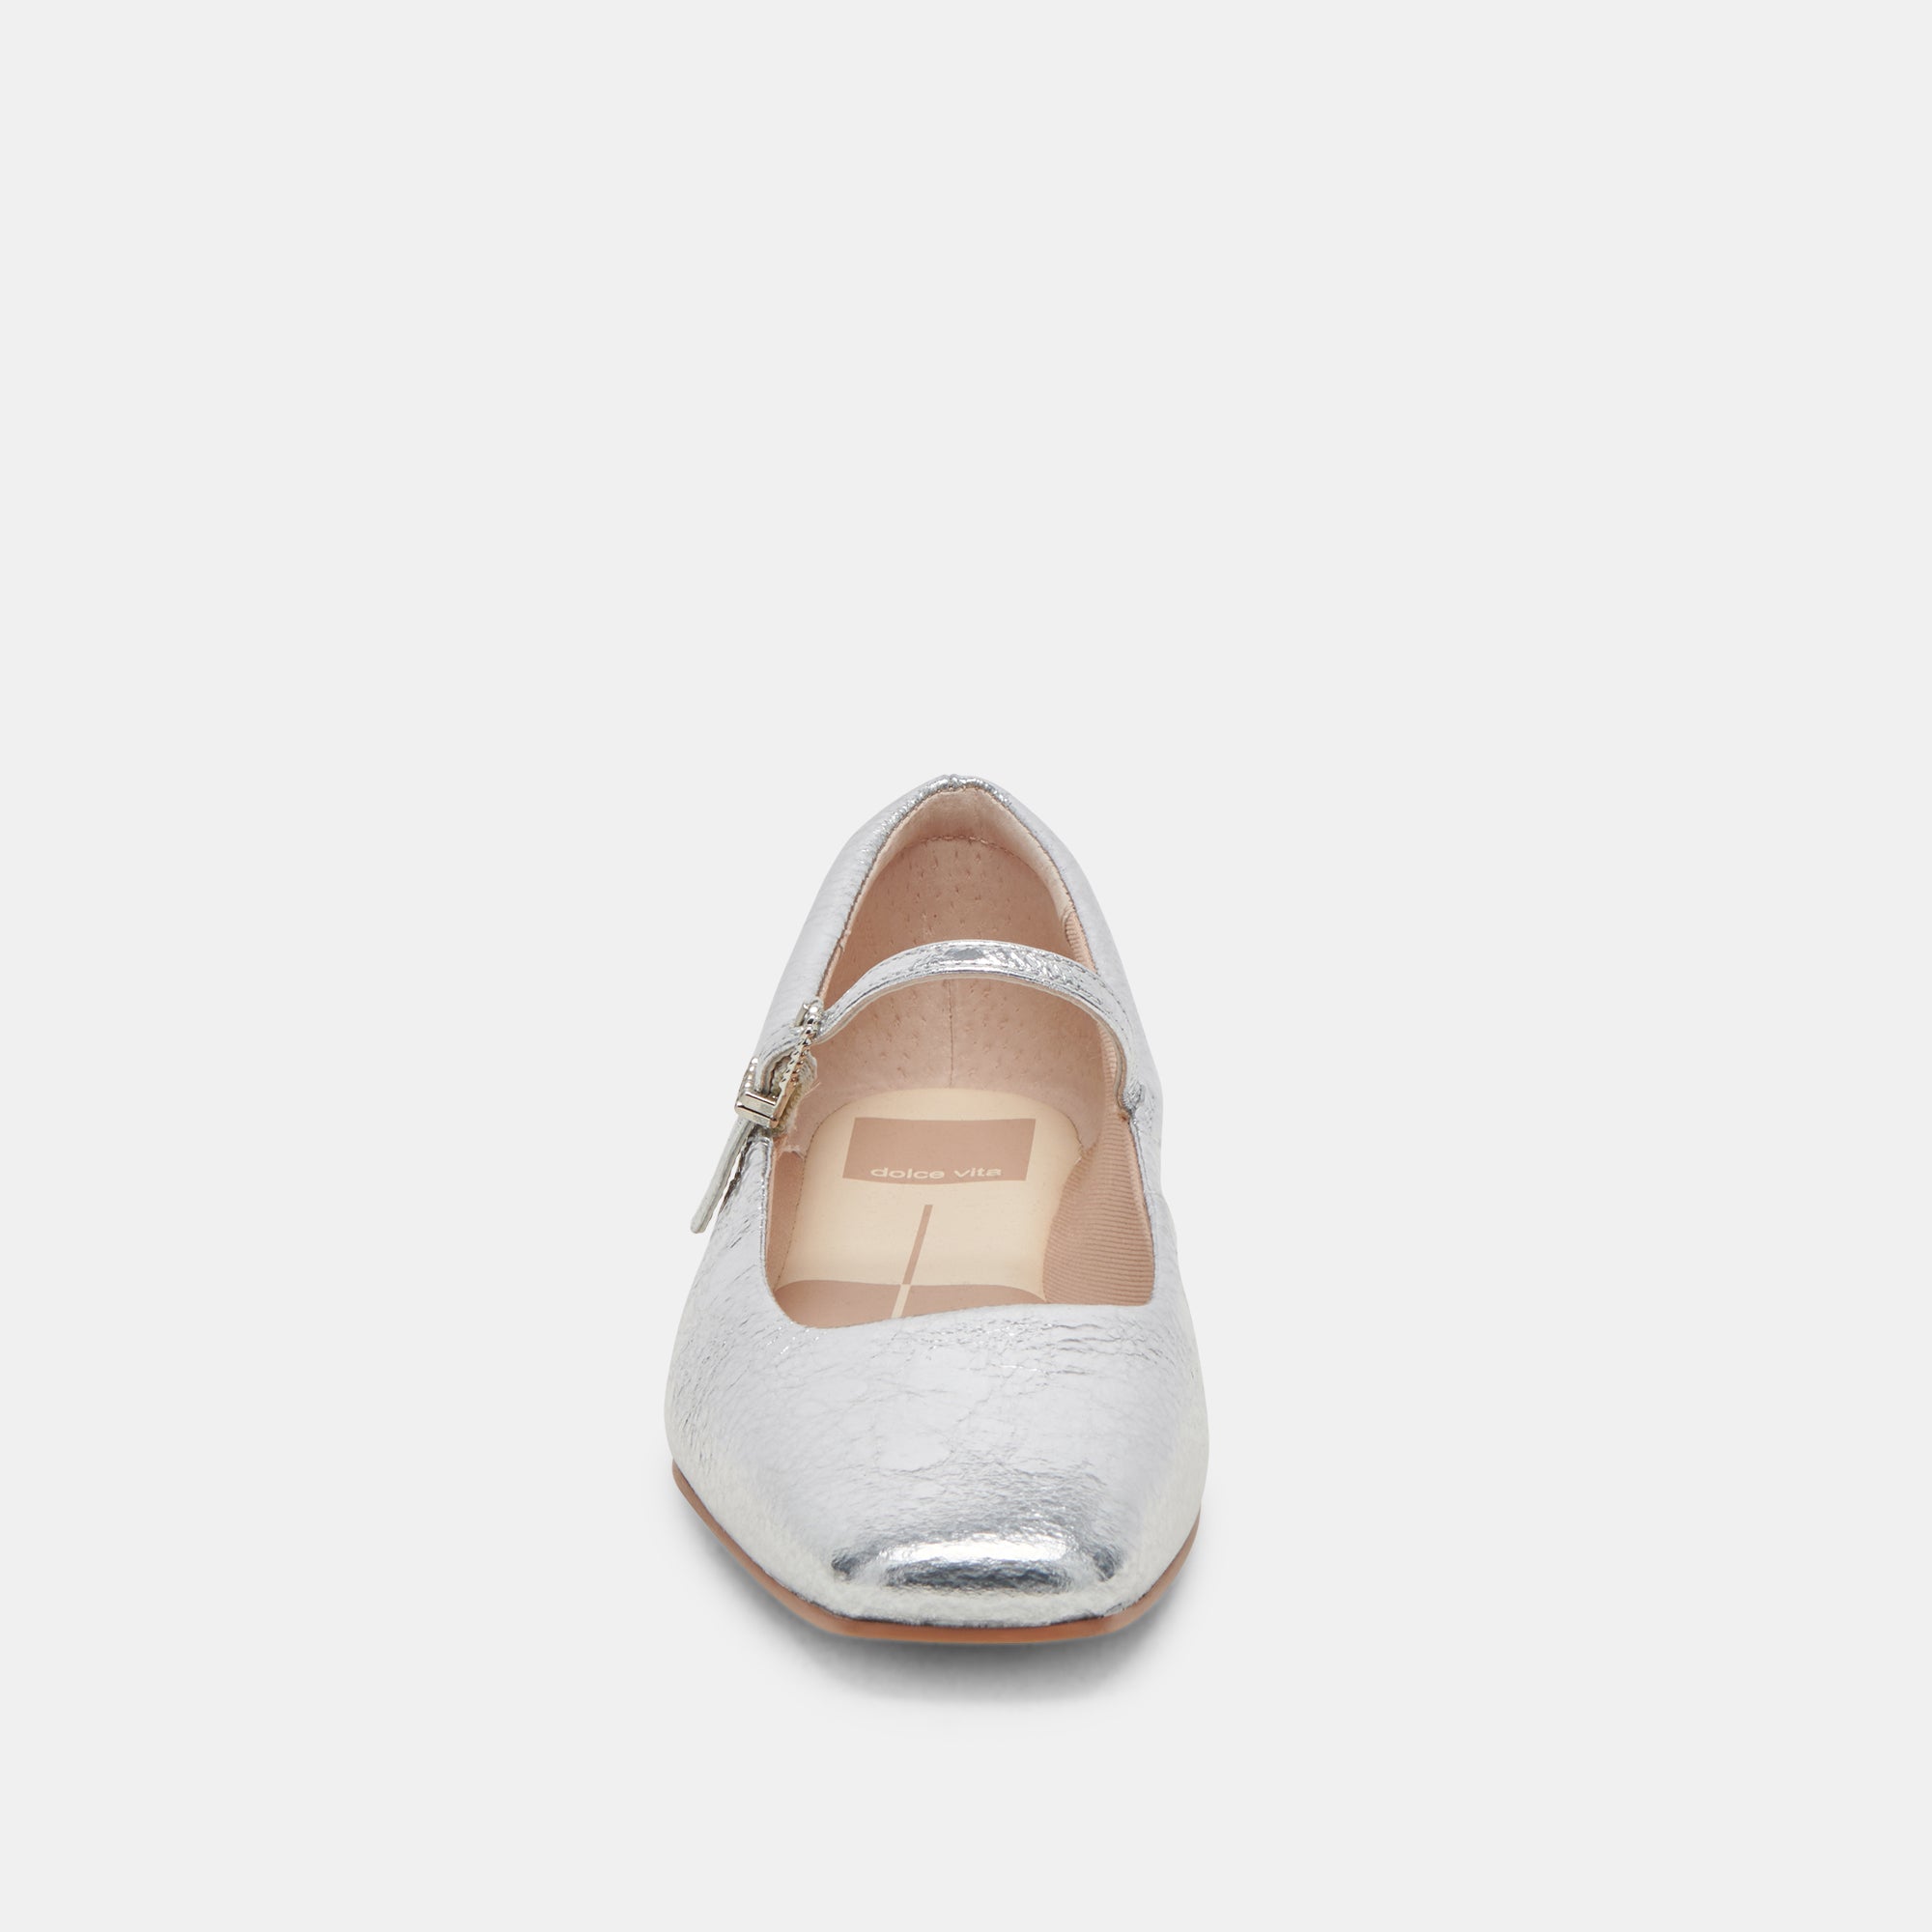 REYES BALLET FLATS SILVER DISTRESSED LEATHER – Dolce Vita